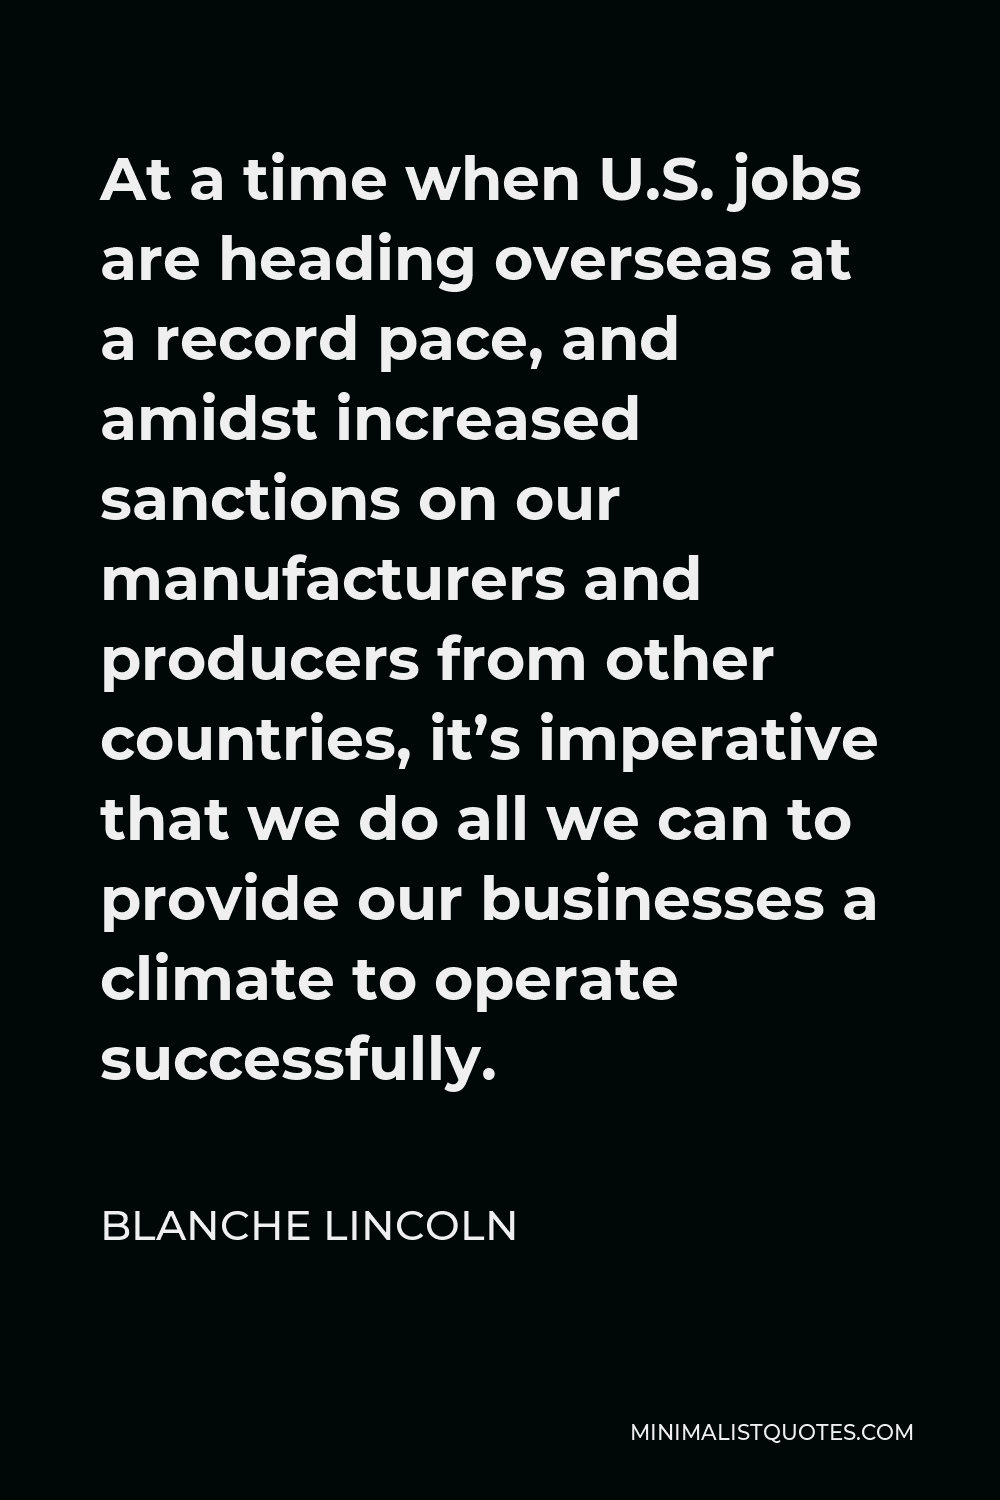 Blanche Lincoln Quote - At a time when U.S. jobs are heading overseas at a record pace, and amidst increased sanctions on our manufacturers and producers from other countries, it’s imperative that we do all we can to provide our businesses a climate to operate successfully.